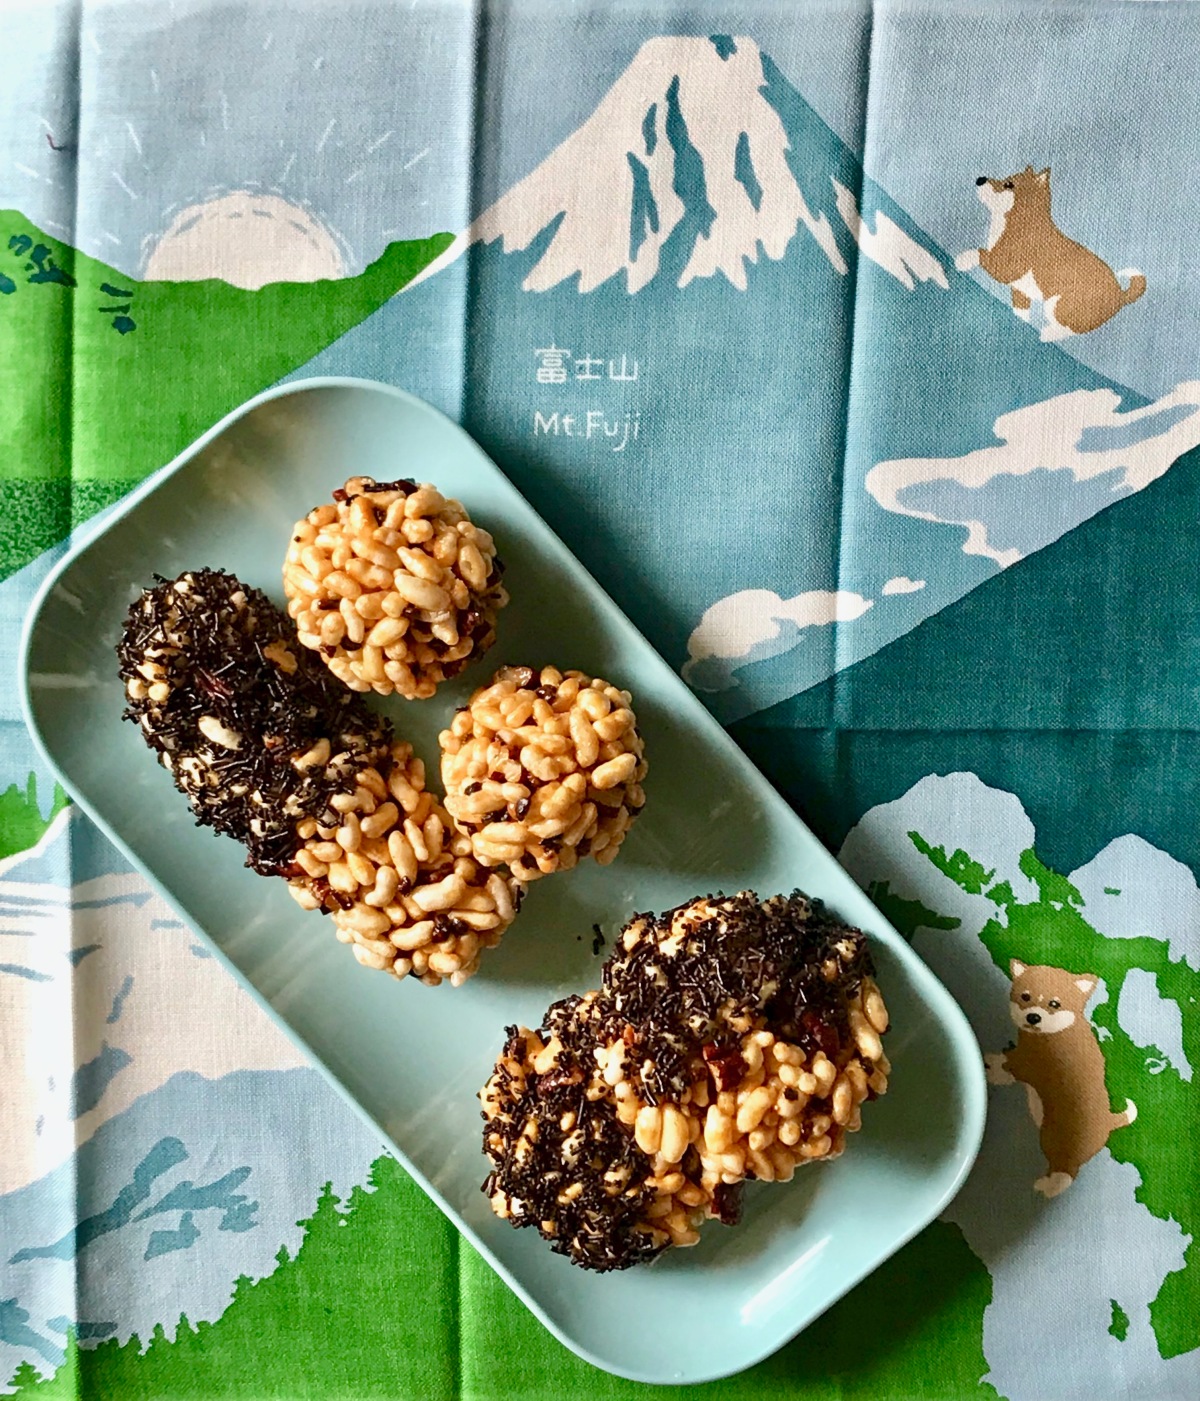 Pecan, Cacao Nibs and Butter Roasted Puffed Rice Ladoos, Cookies and Bars or Murmura Ladoo with Swag